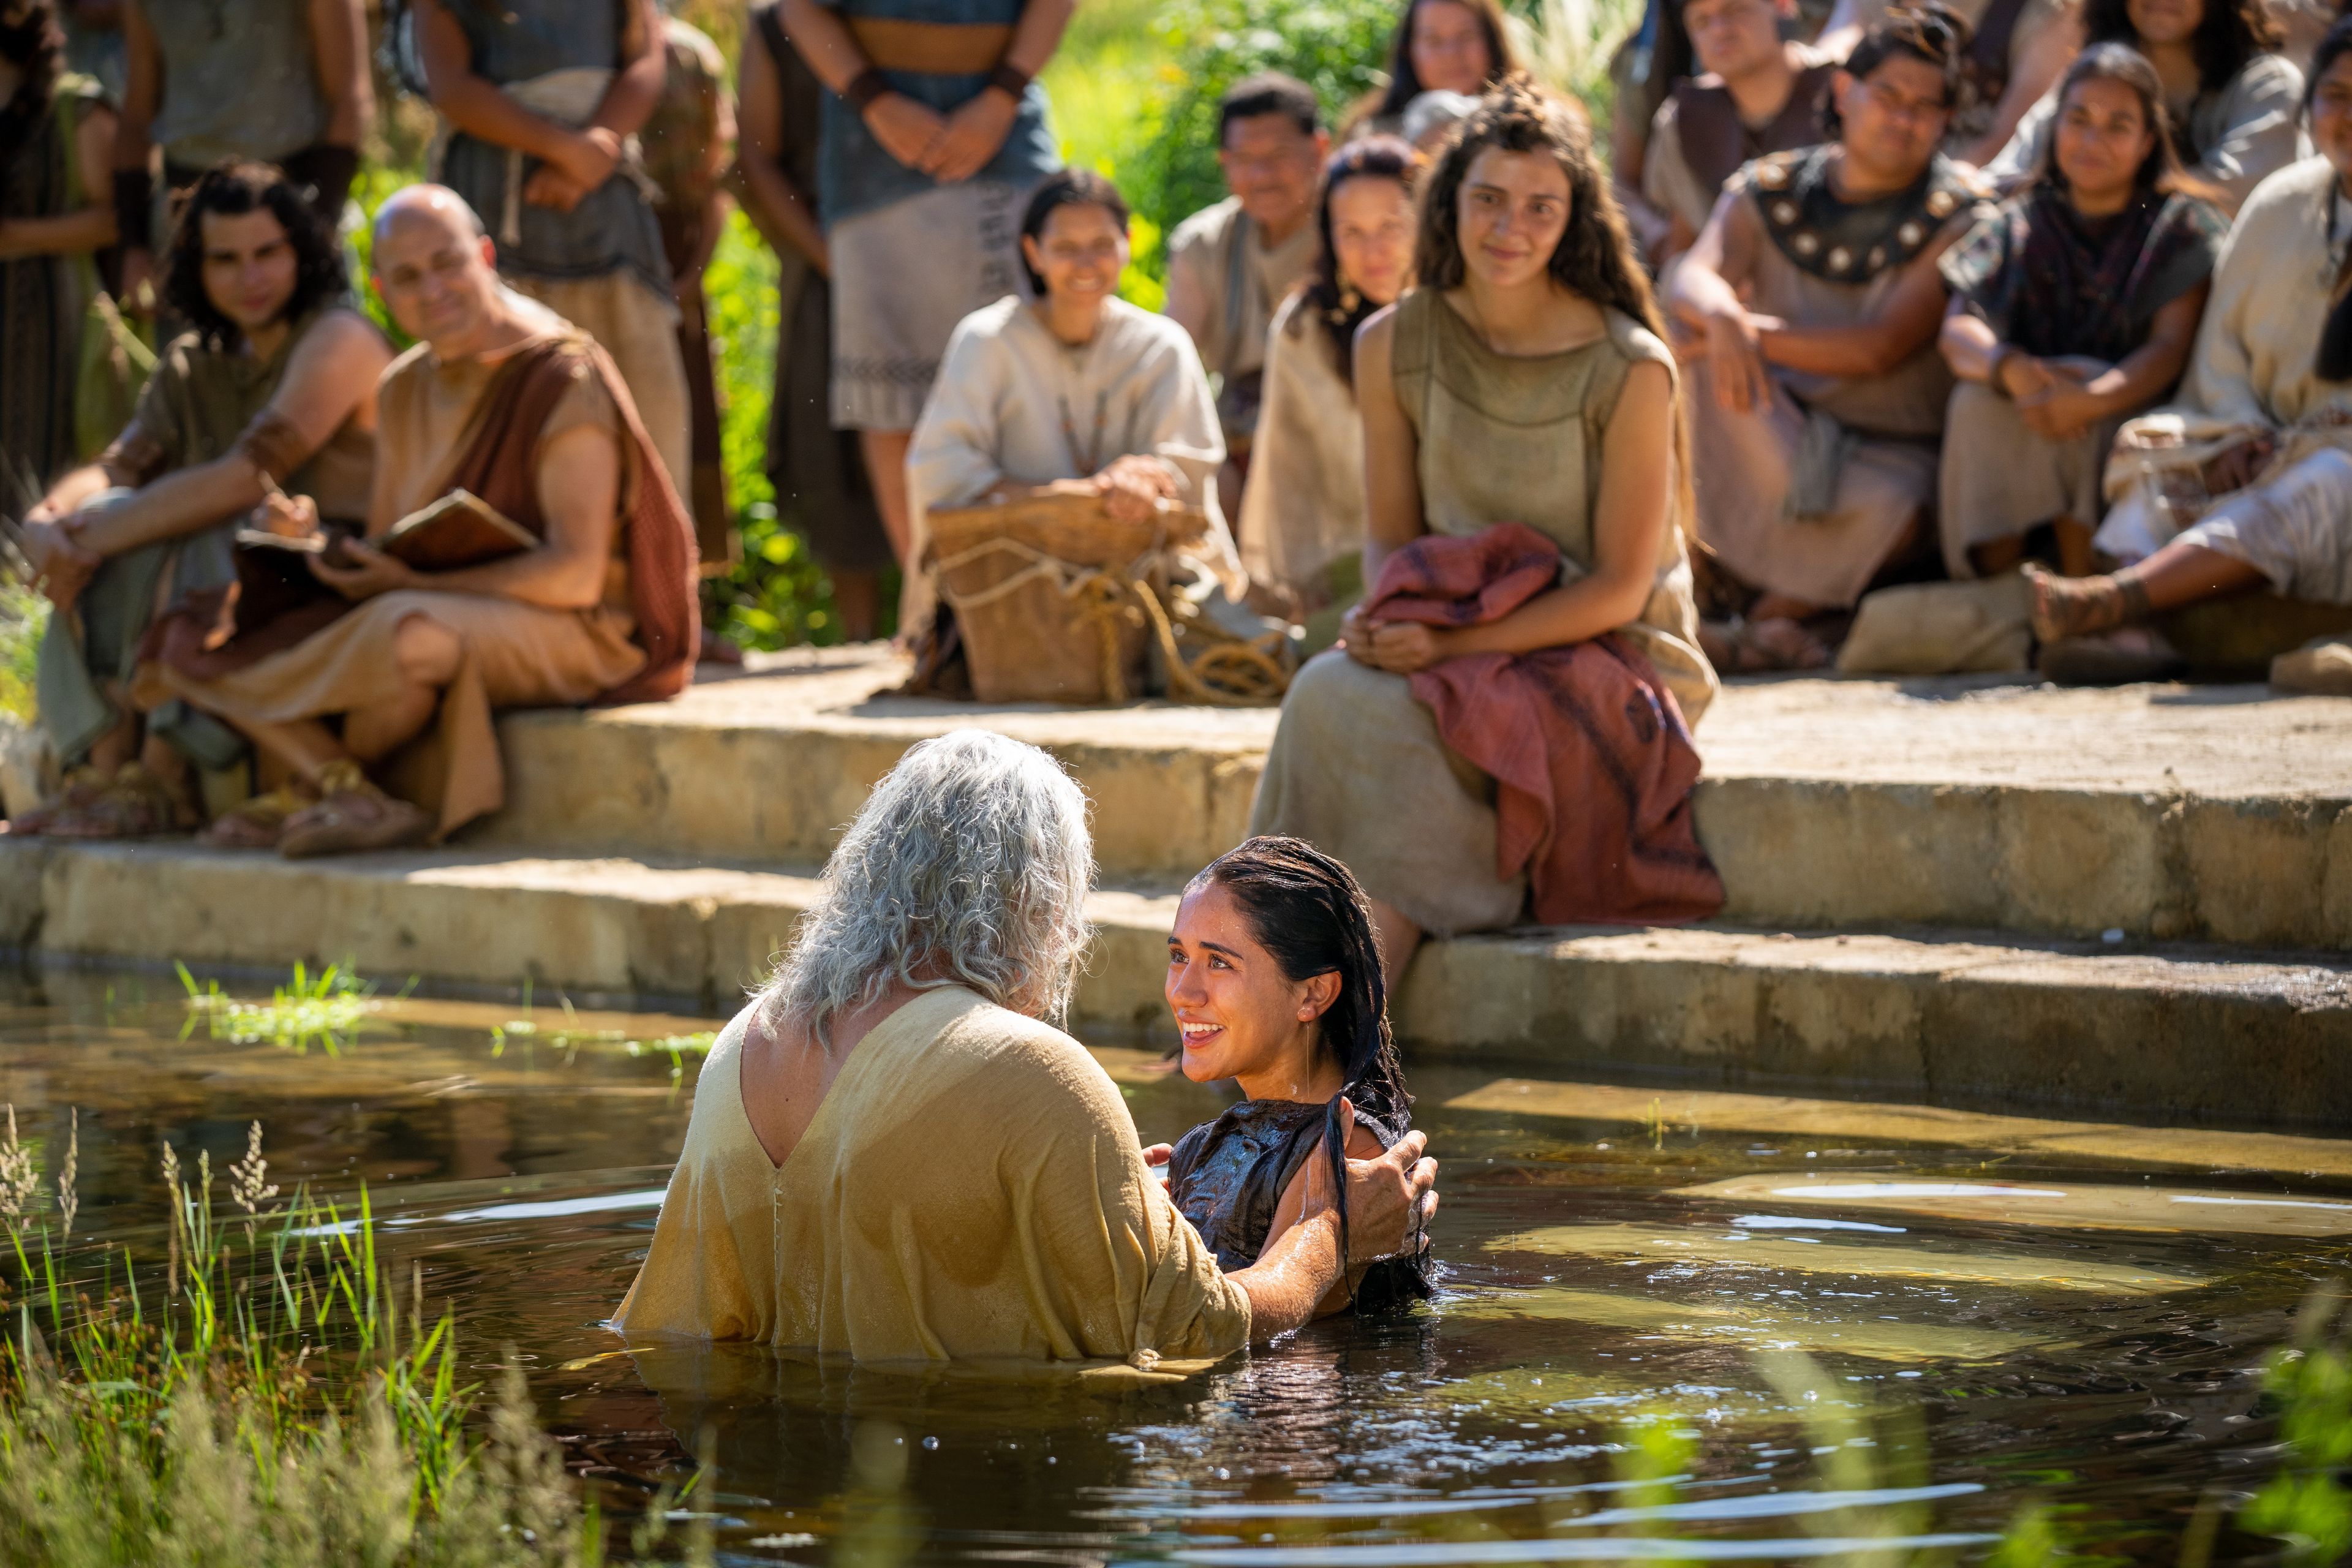 Nephi, son of Nephi, baptizes other Nephites in a river. Others (including Timothy and Jonas) stand at the water's edge and watch.